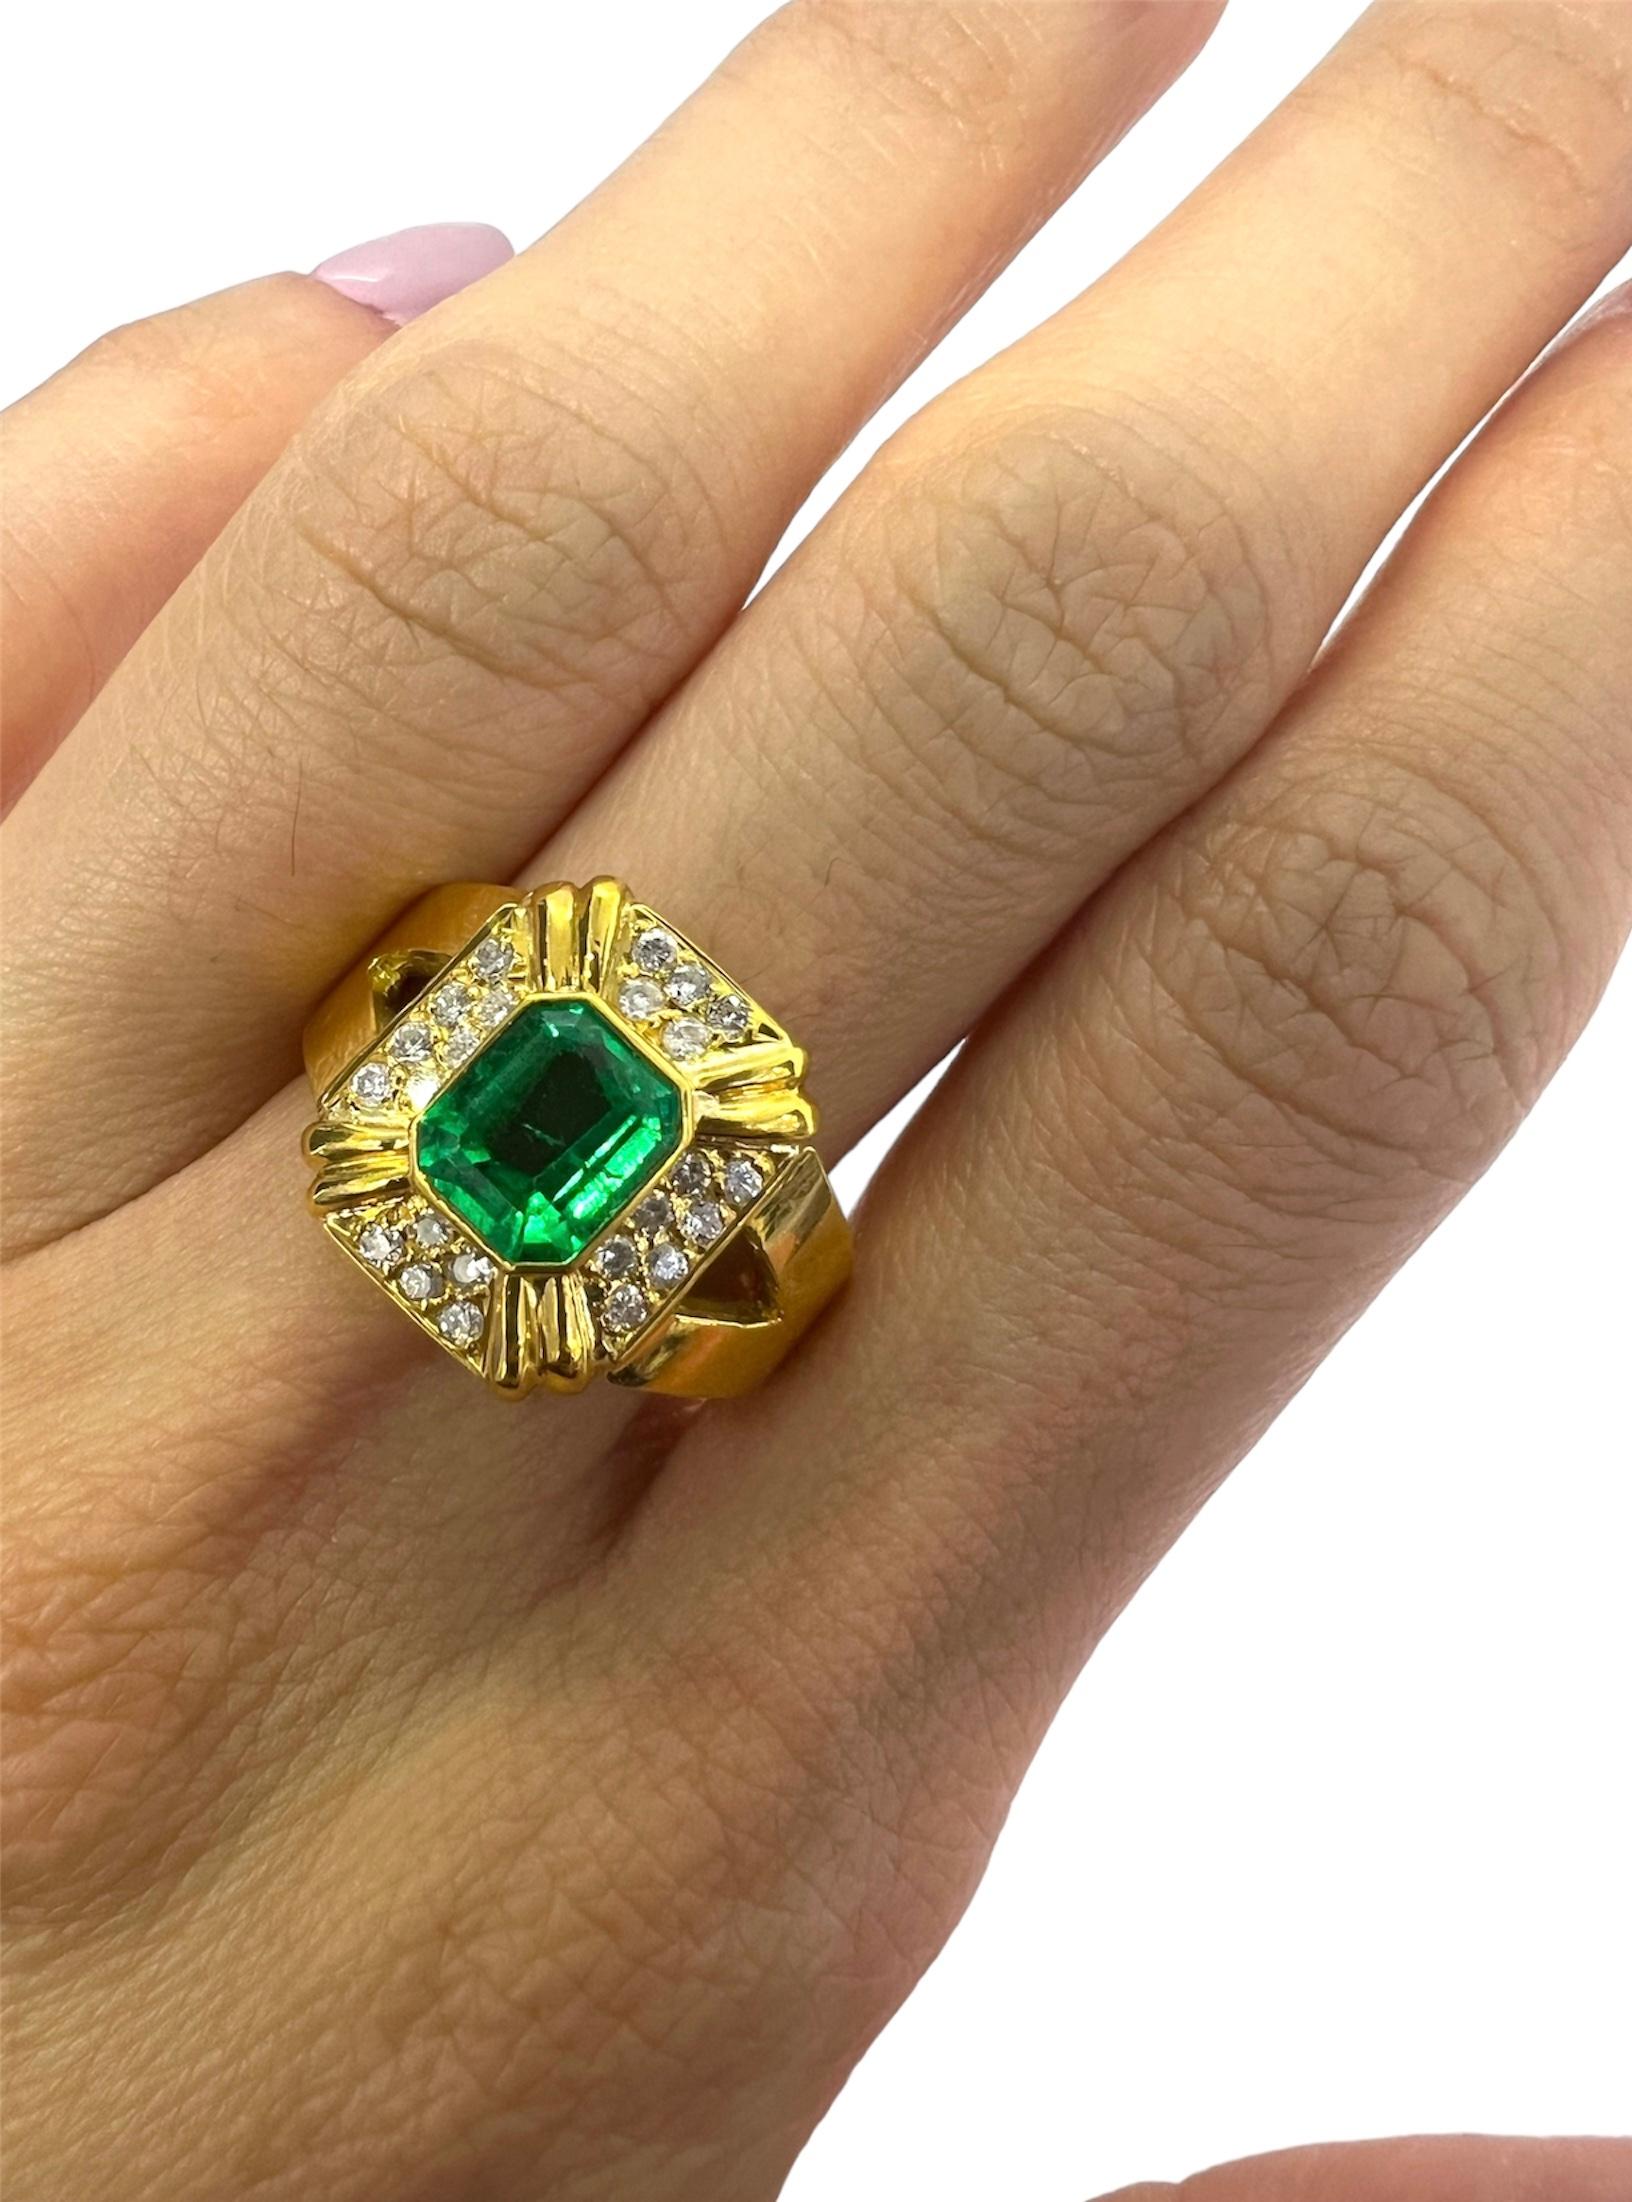 18K yellow gold ring with emerald center stone and diamond.

Sophia D by Joseph Dardashti LTD has been known worldwide for 35 years and are inspired by classic Art Deco design that merges with modern manufacturing techniques.